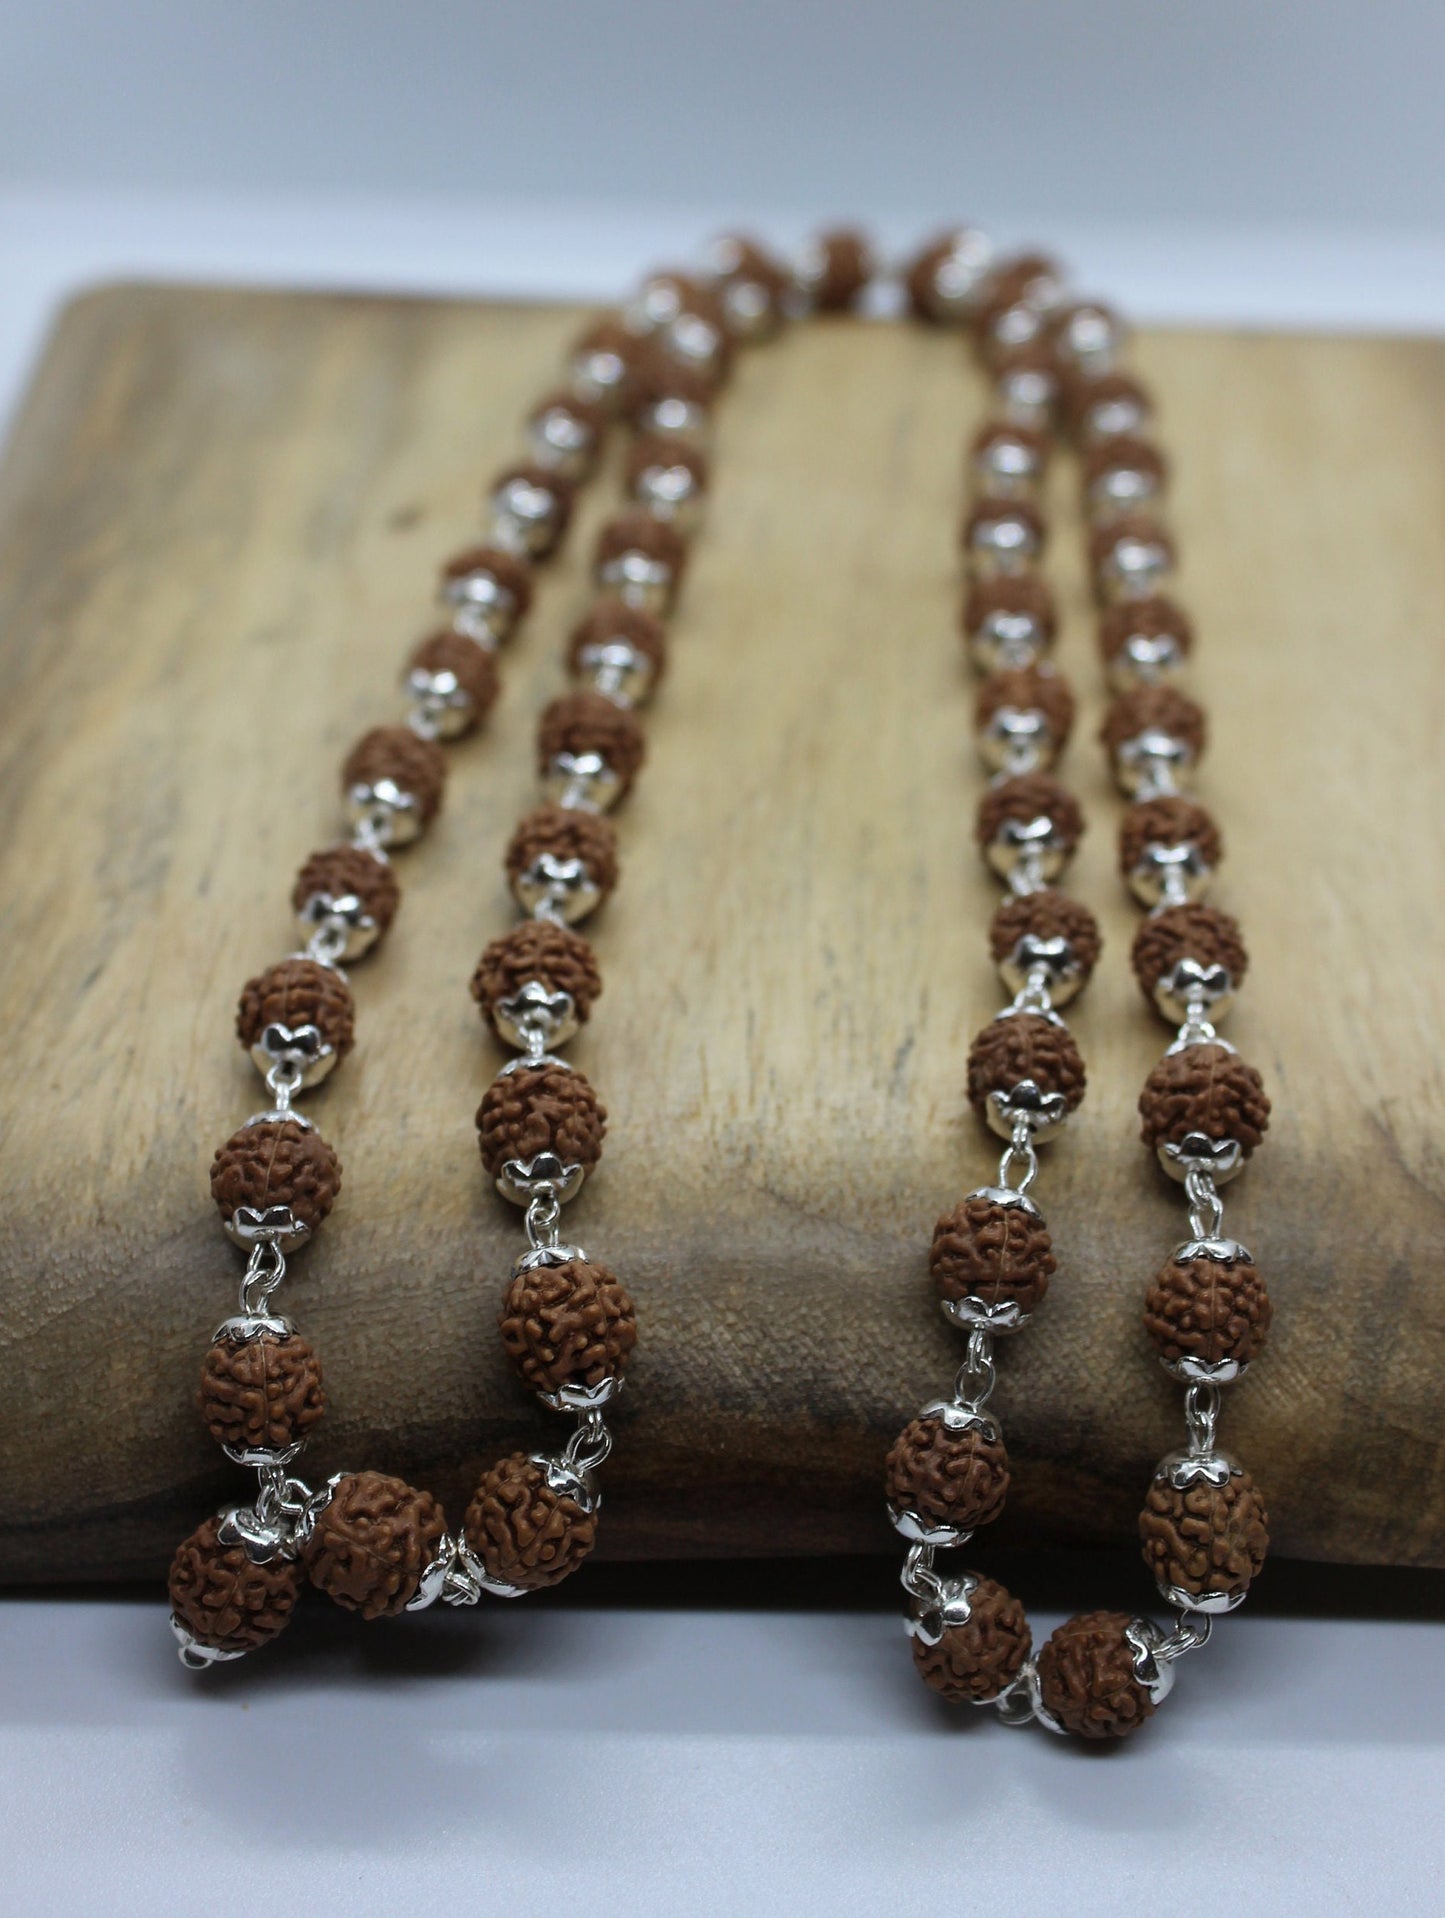 5 Mukhi Rudraksha, Indonesian Beads 925 silver cap Mala, 54 beads Rudraksh Mala Necklace, 8 mm rudraksha Genuine Beads wire wrapped necklace